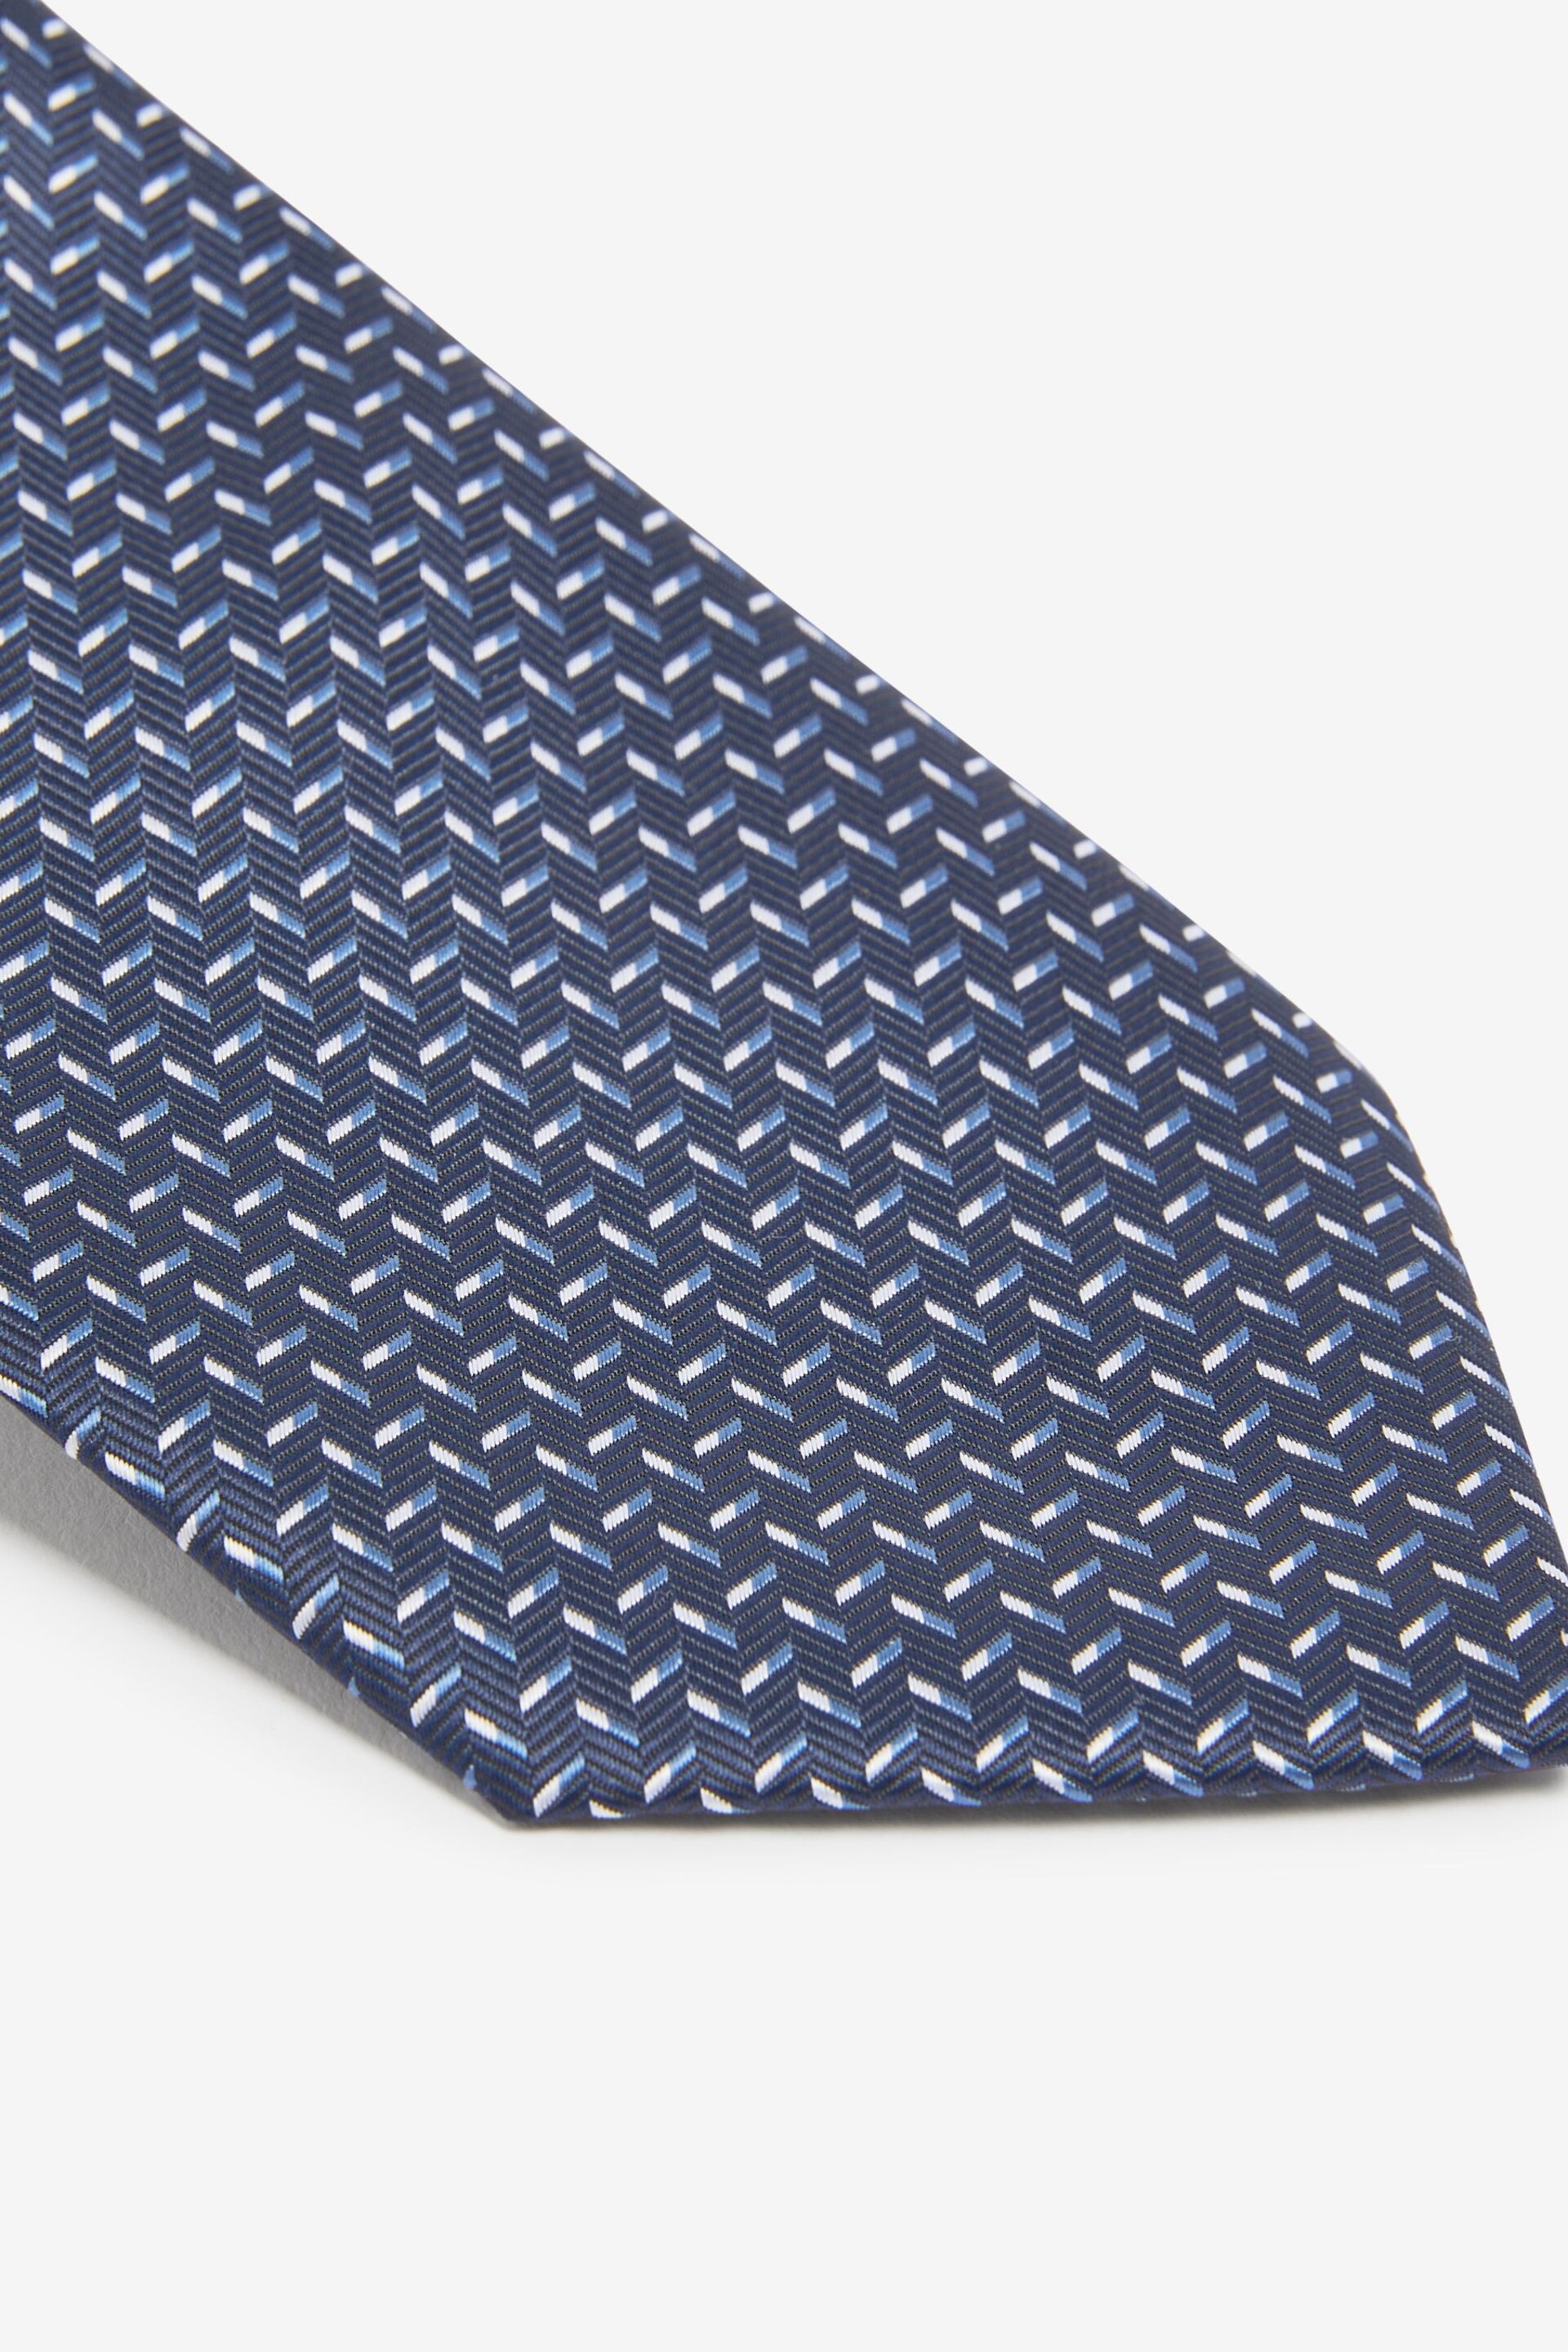 Navy Blue/Rust Brown Textured Tie With Tie Clips 2 Pack - Image 5 of 8